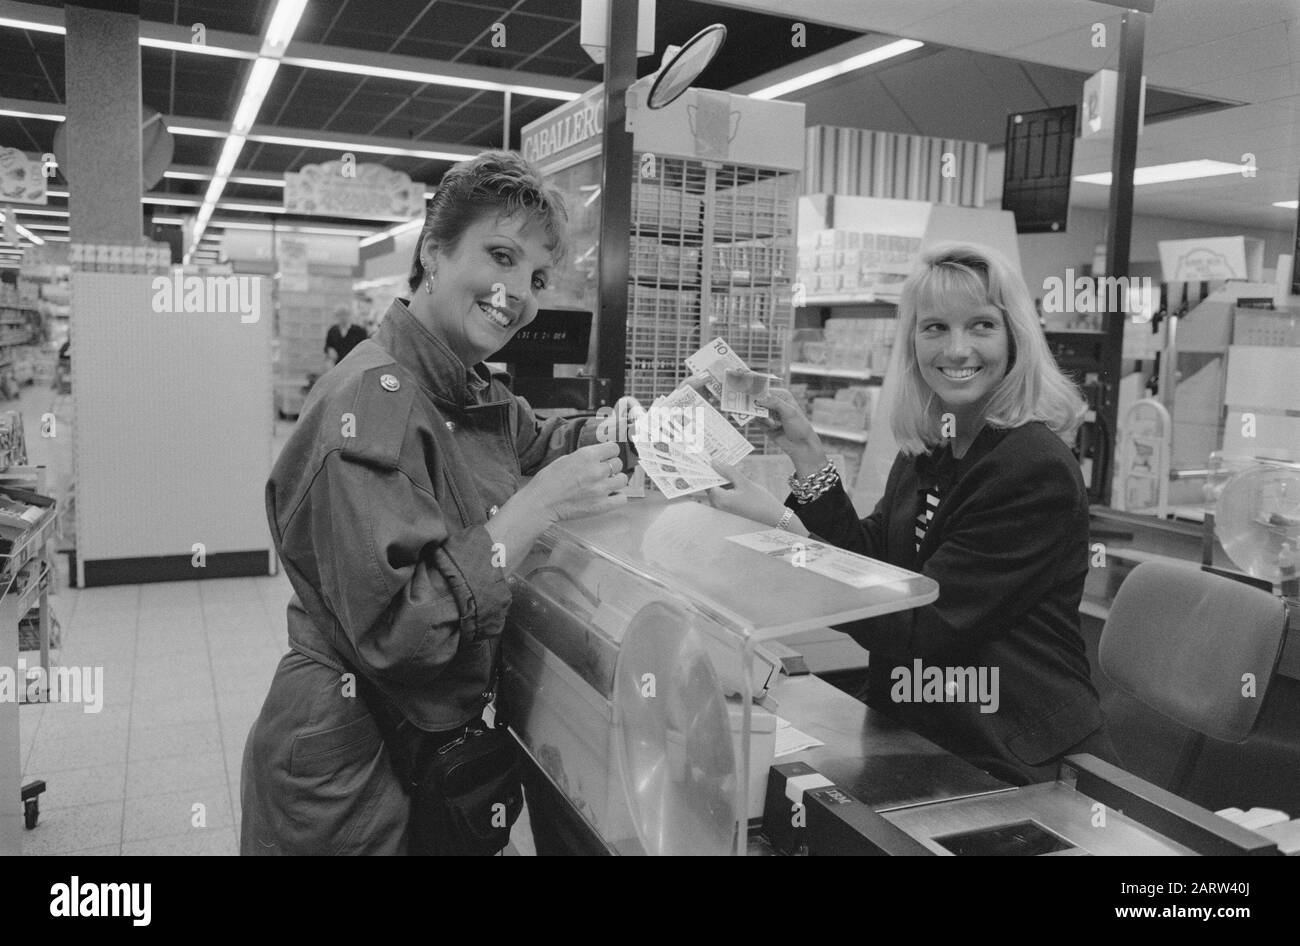 Start Dierenbingo in Bussum for the benefit of animal protection; Carry Tefsen (l) and Linda de Mol with the first cards Date: May 30, 1989 Location: Bussum, Noord-Holland Keywords: bingo Personal name: Mol, Linda de, Tefsen, Carry Stock Photo